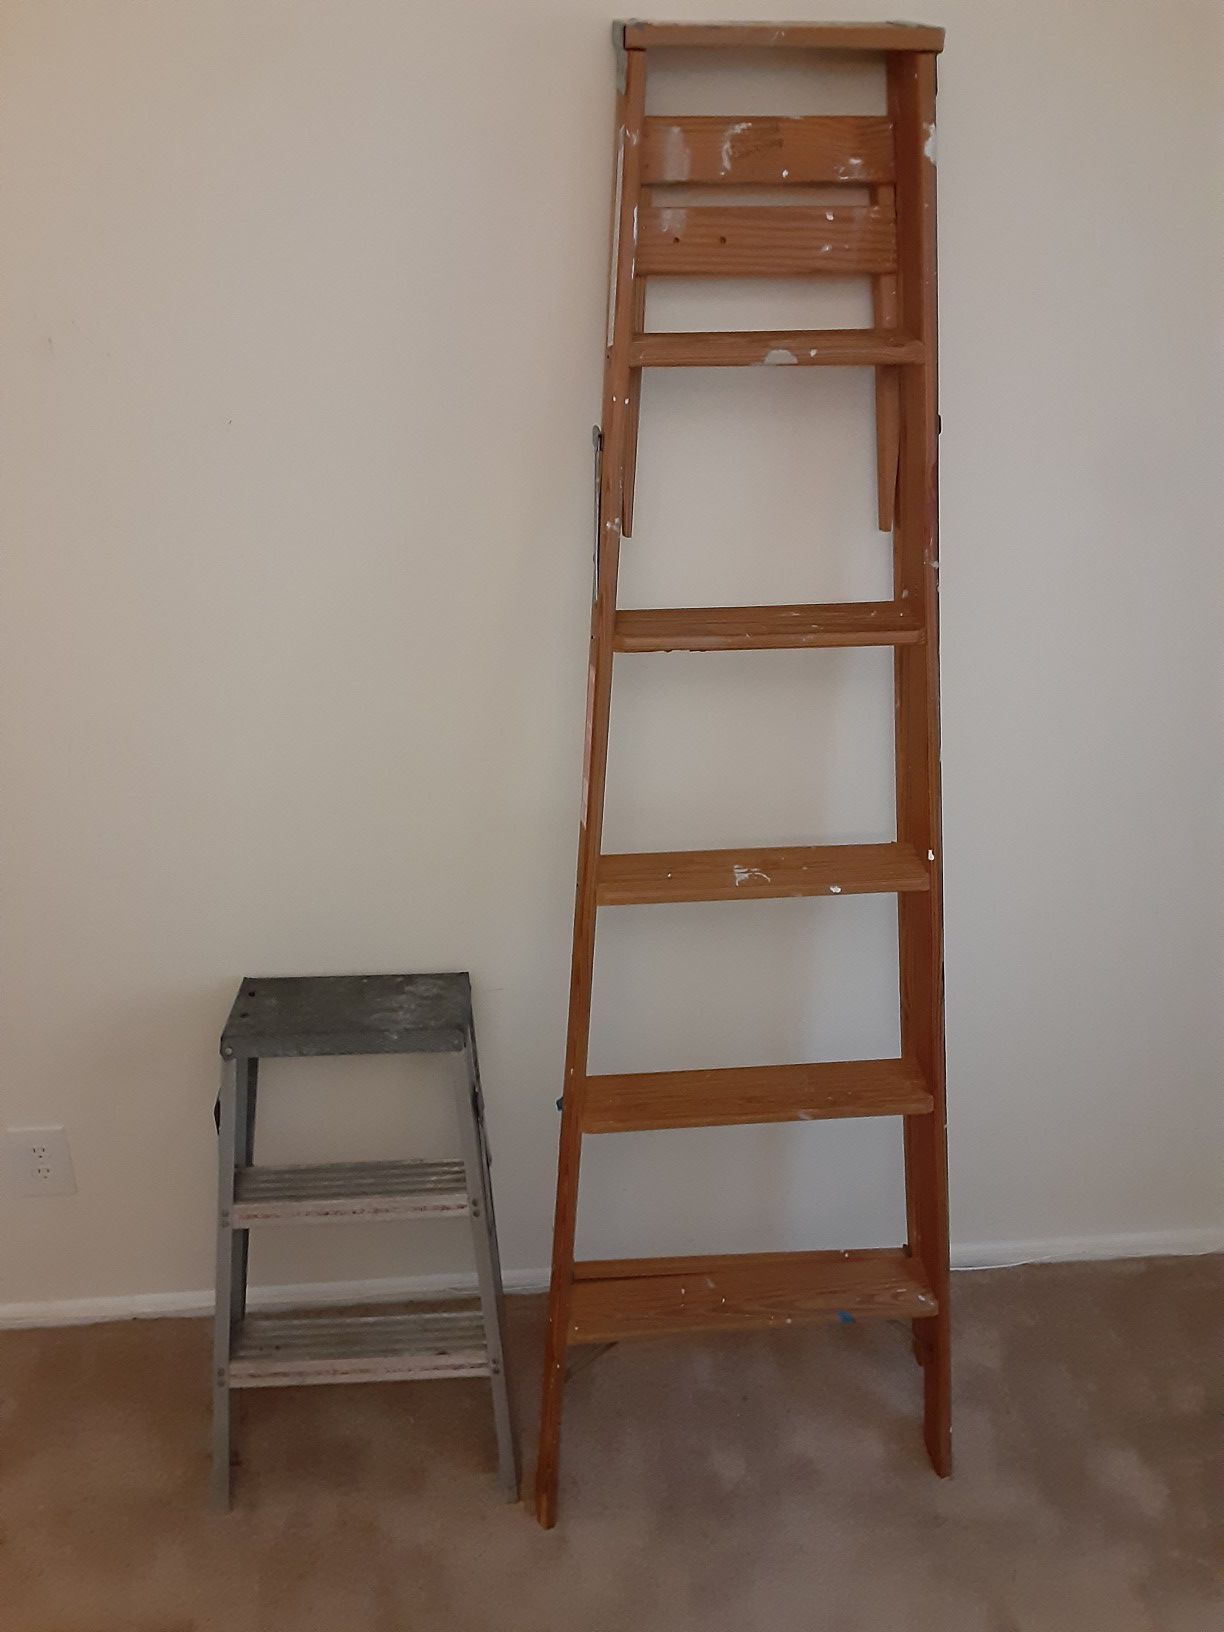 Lot of 2 A frame ladders